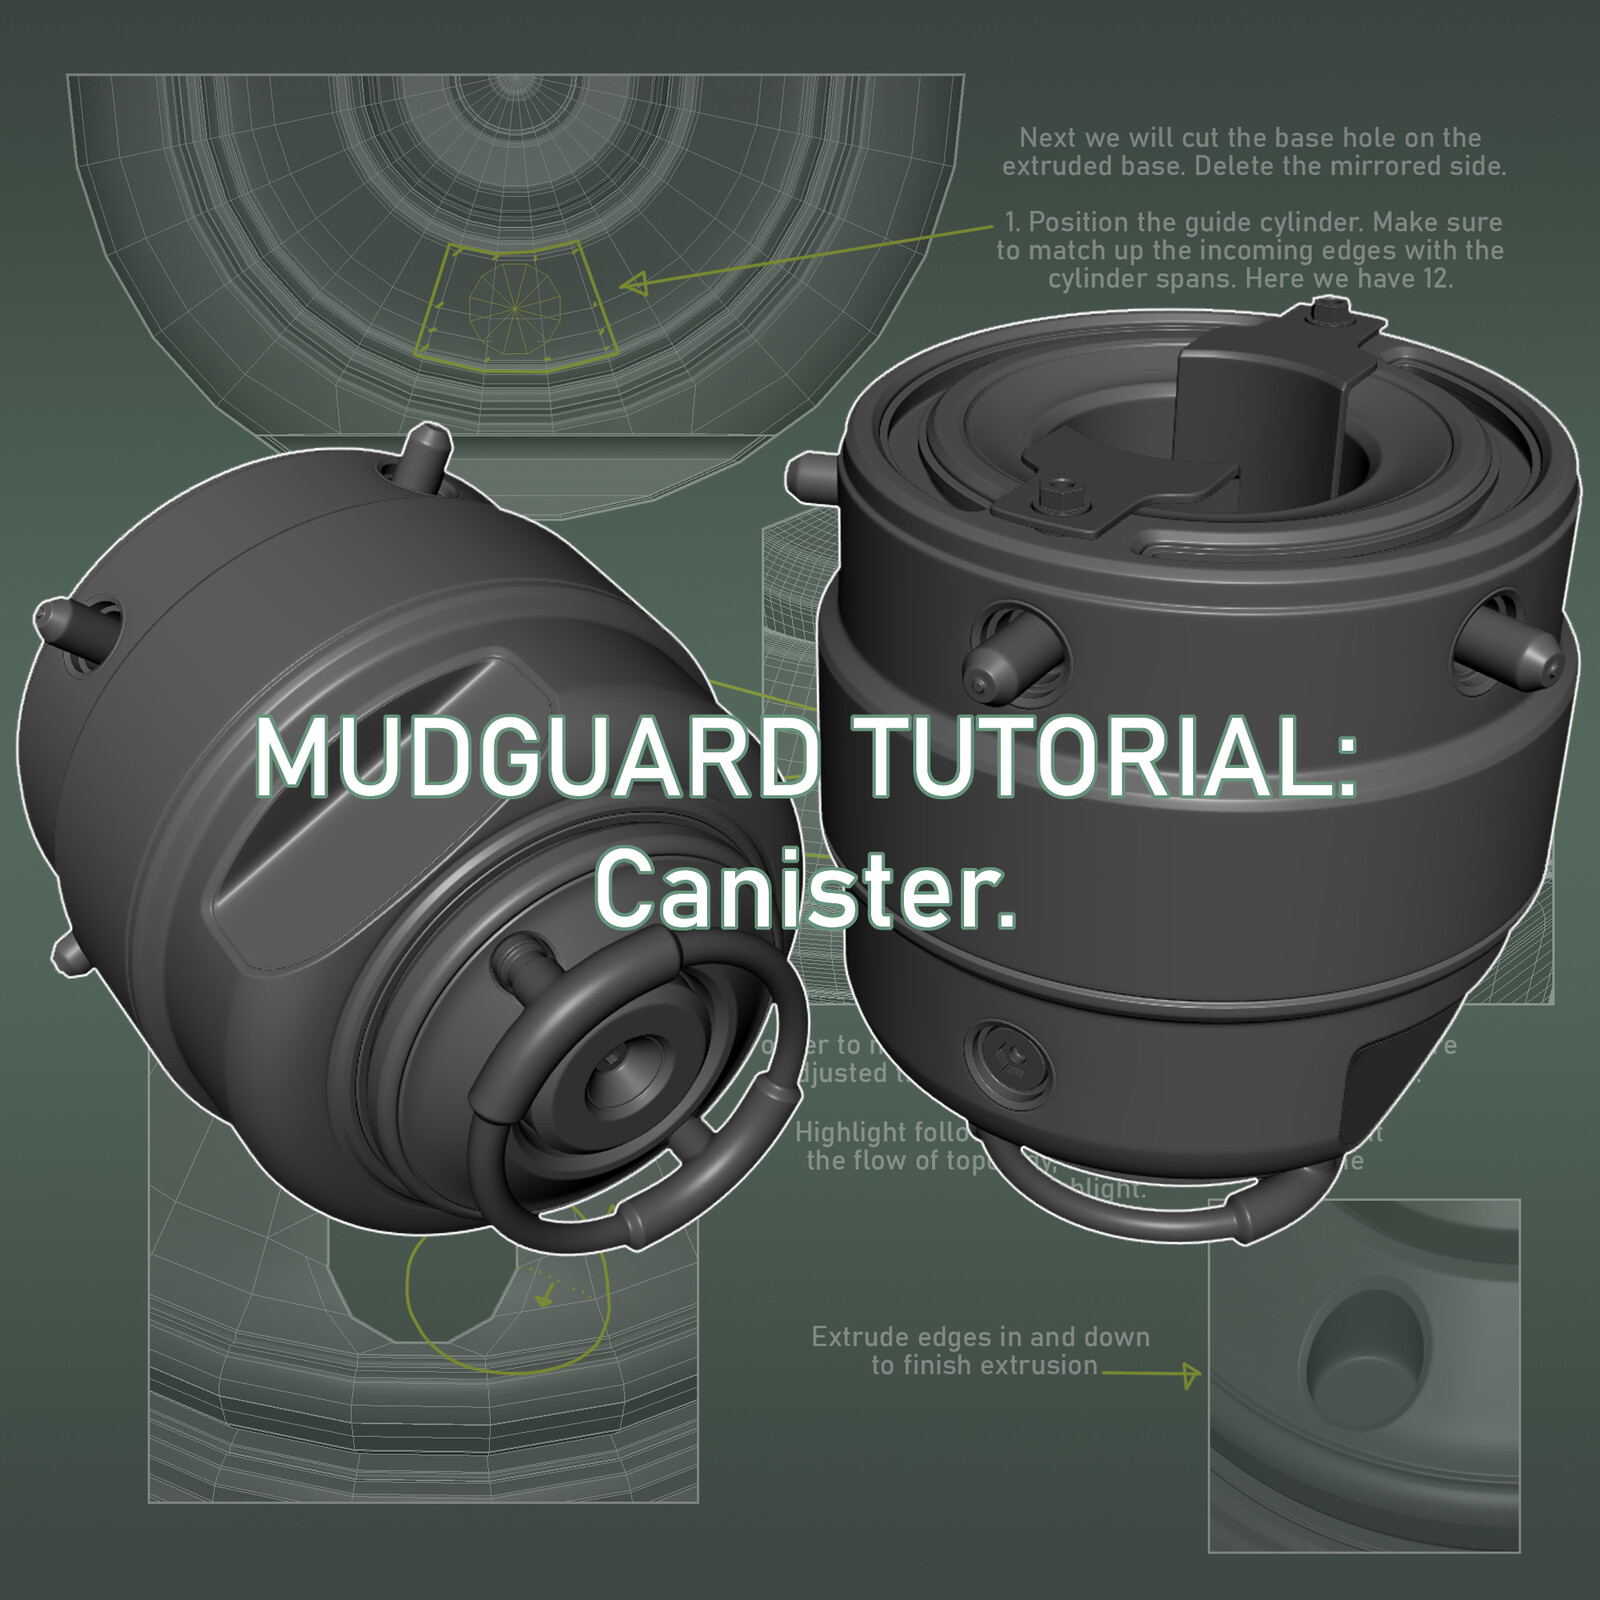 MUDGUARD TUTORIAL: CANISTER